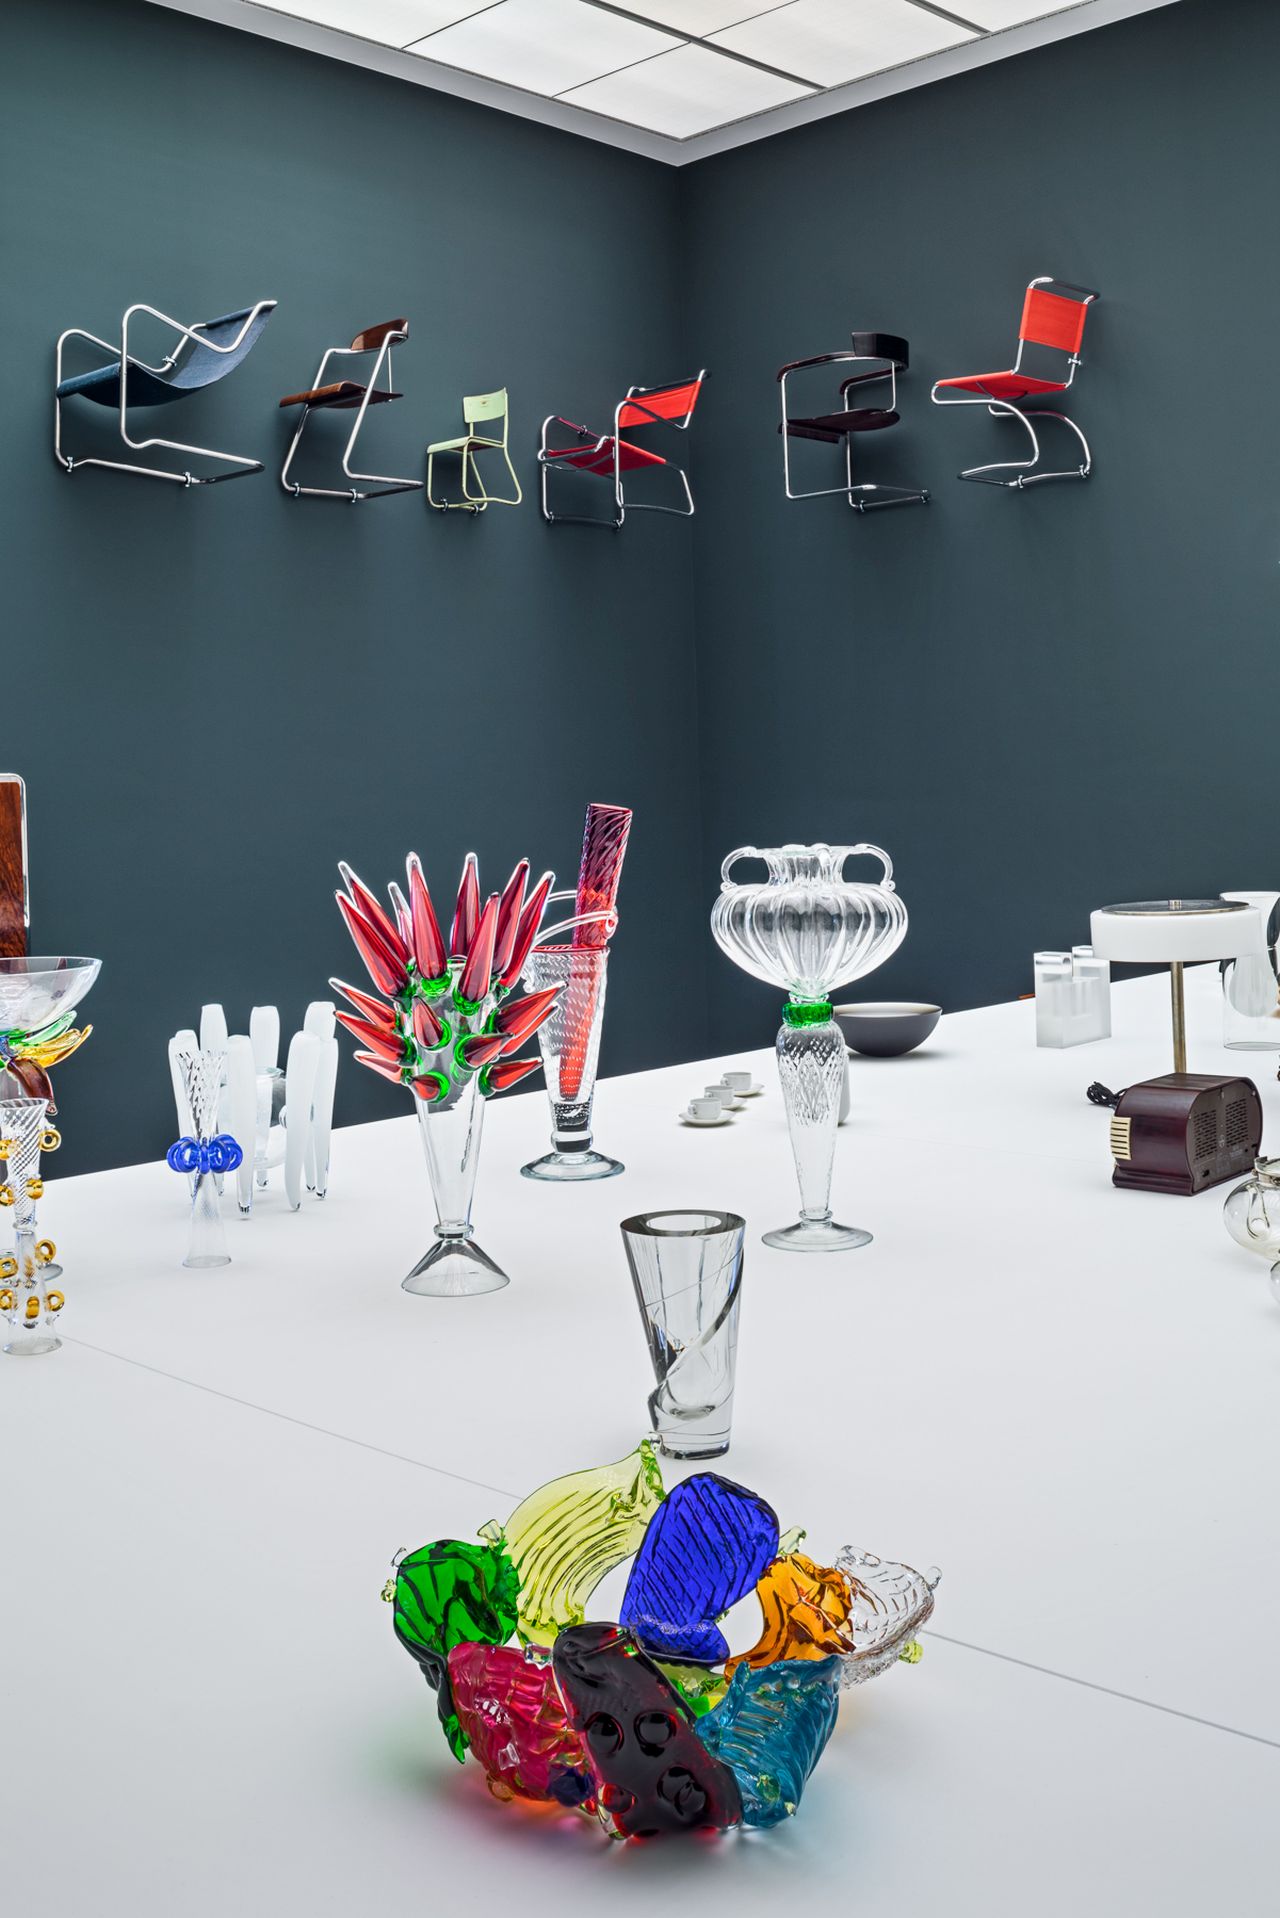 Chairs on the wall, glass objects on a white panel